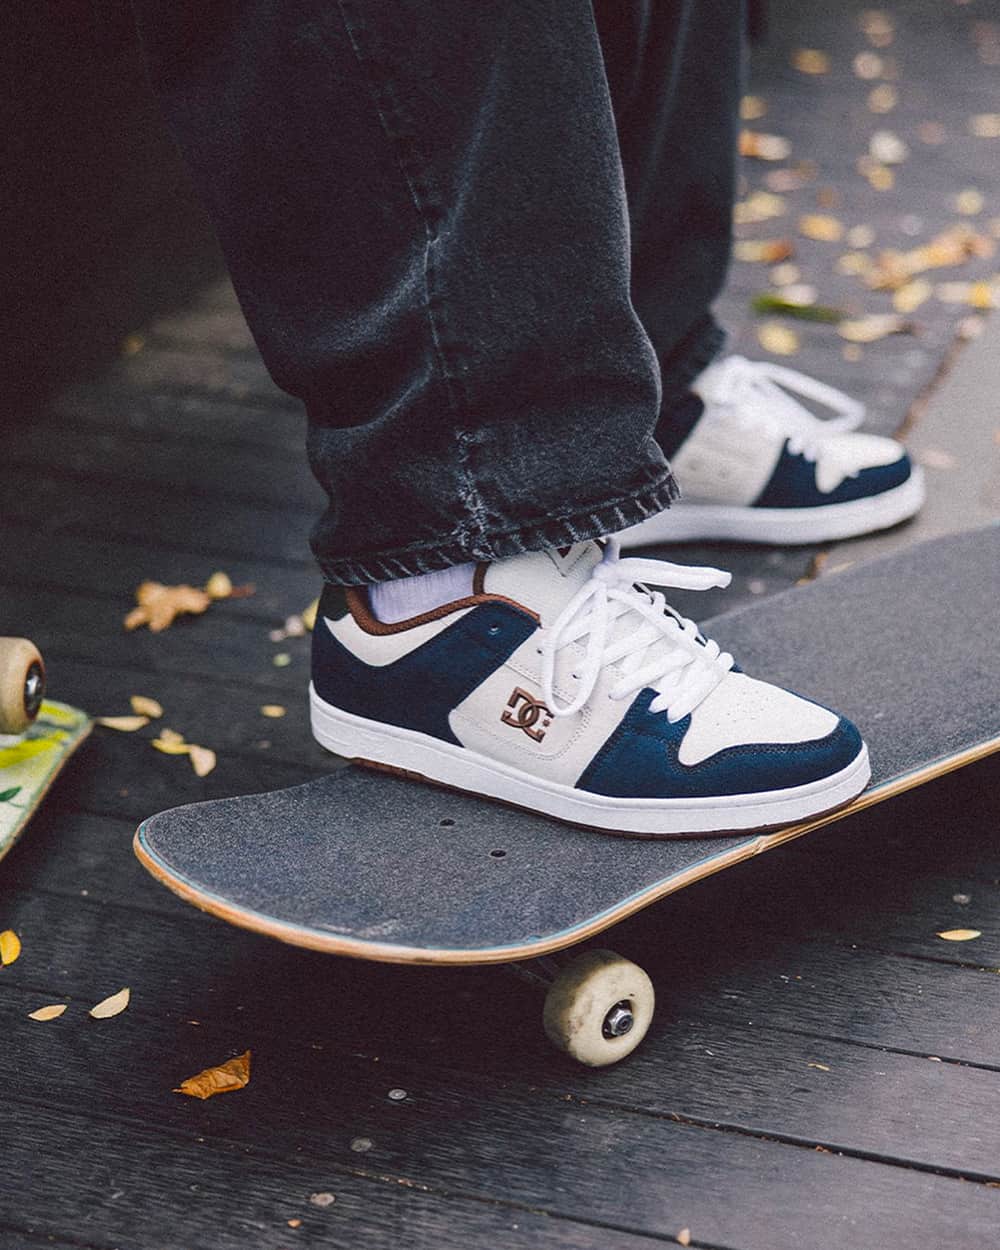 A pair of DC skate shoes worn on feet with white socks and loose black jeans with a skateboard